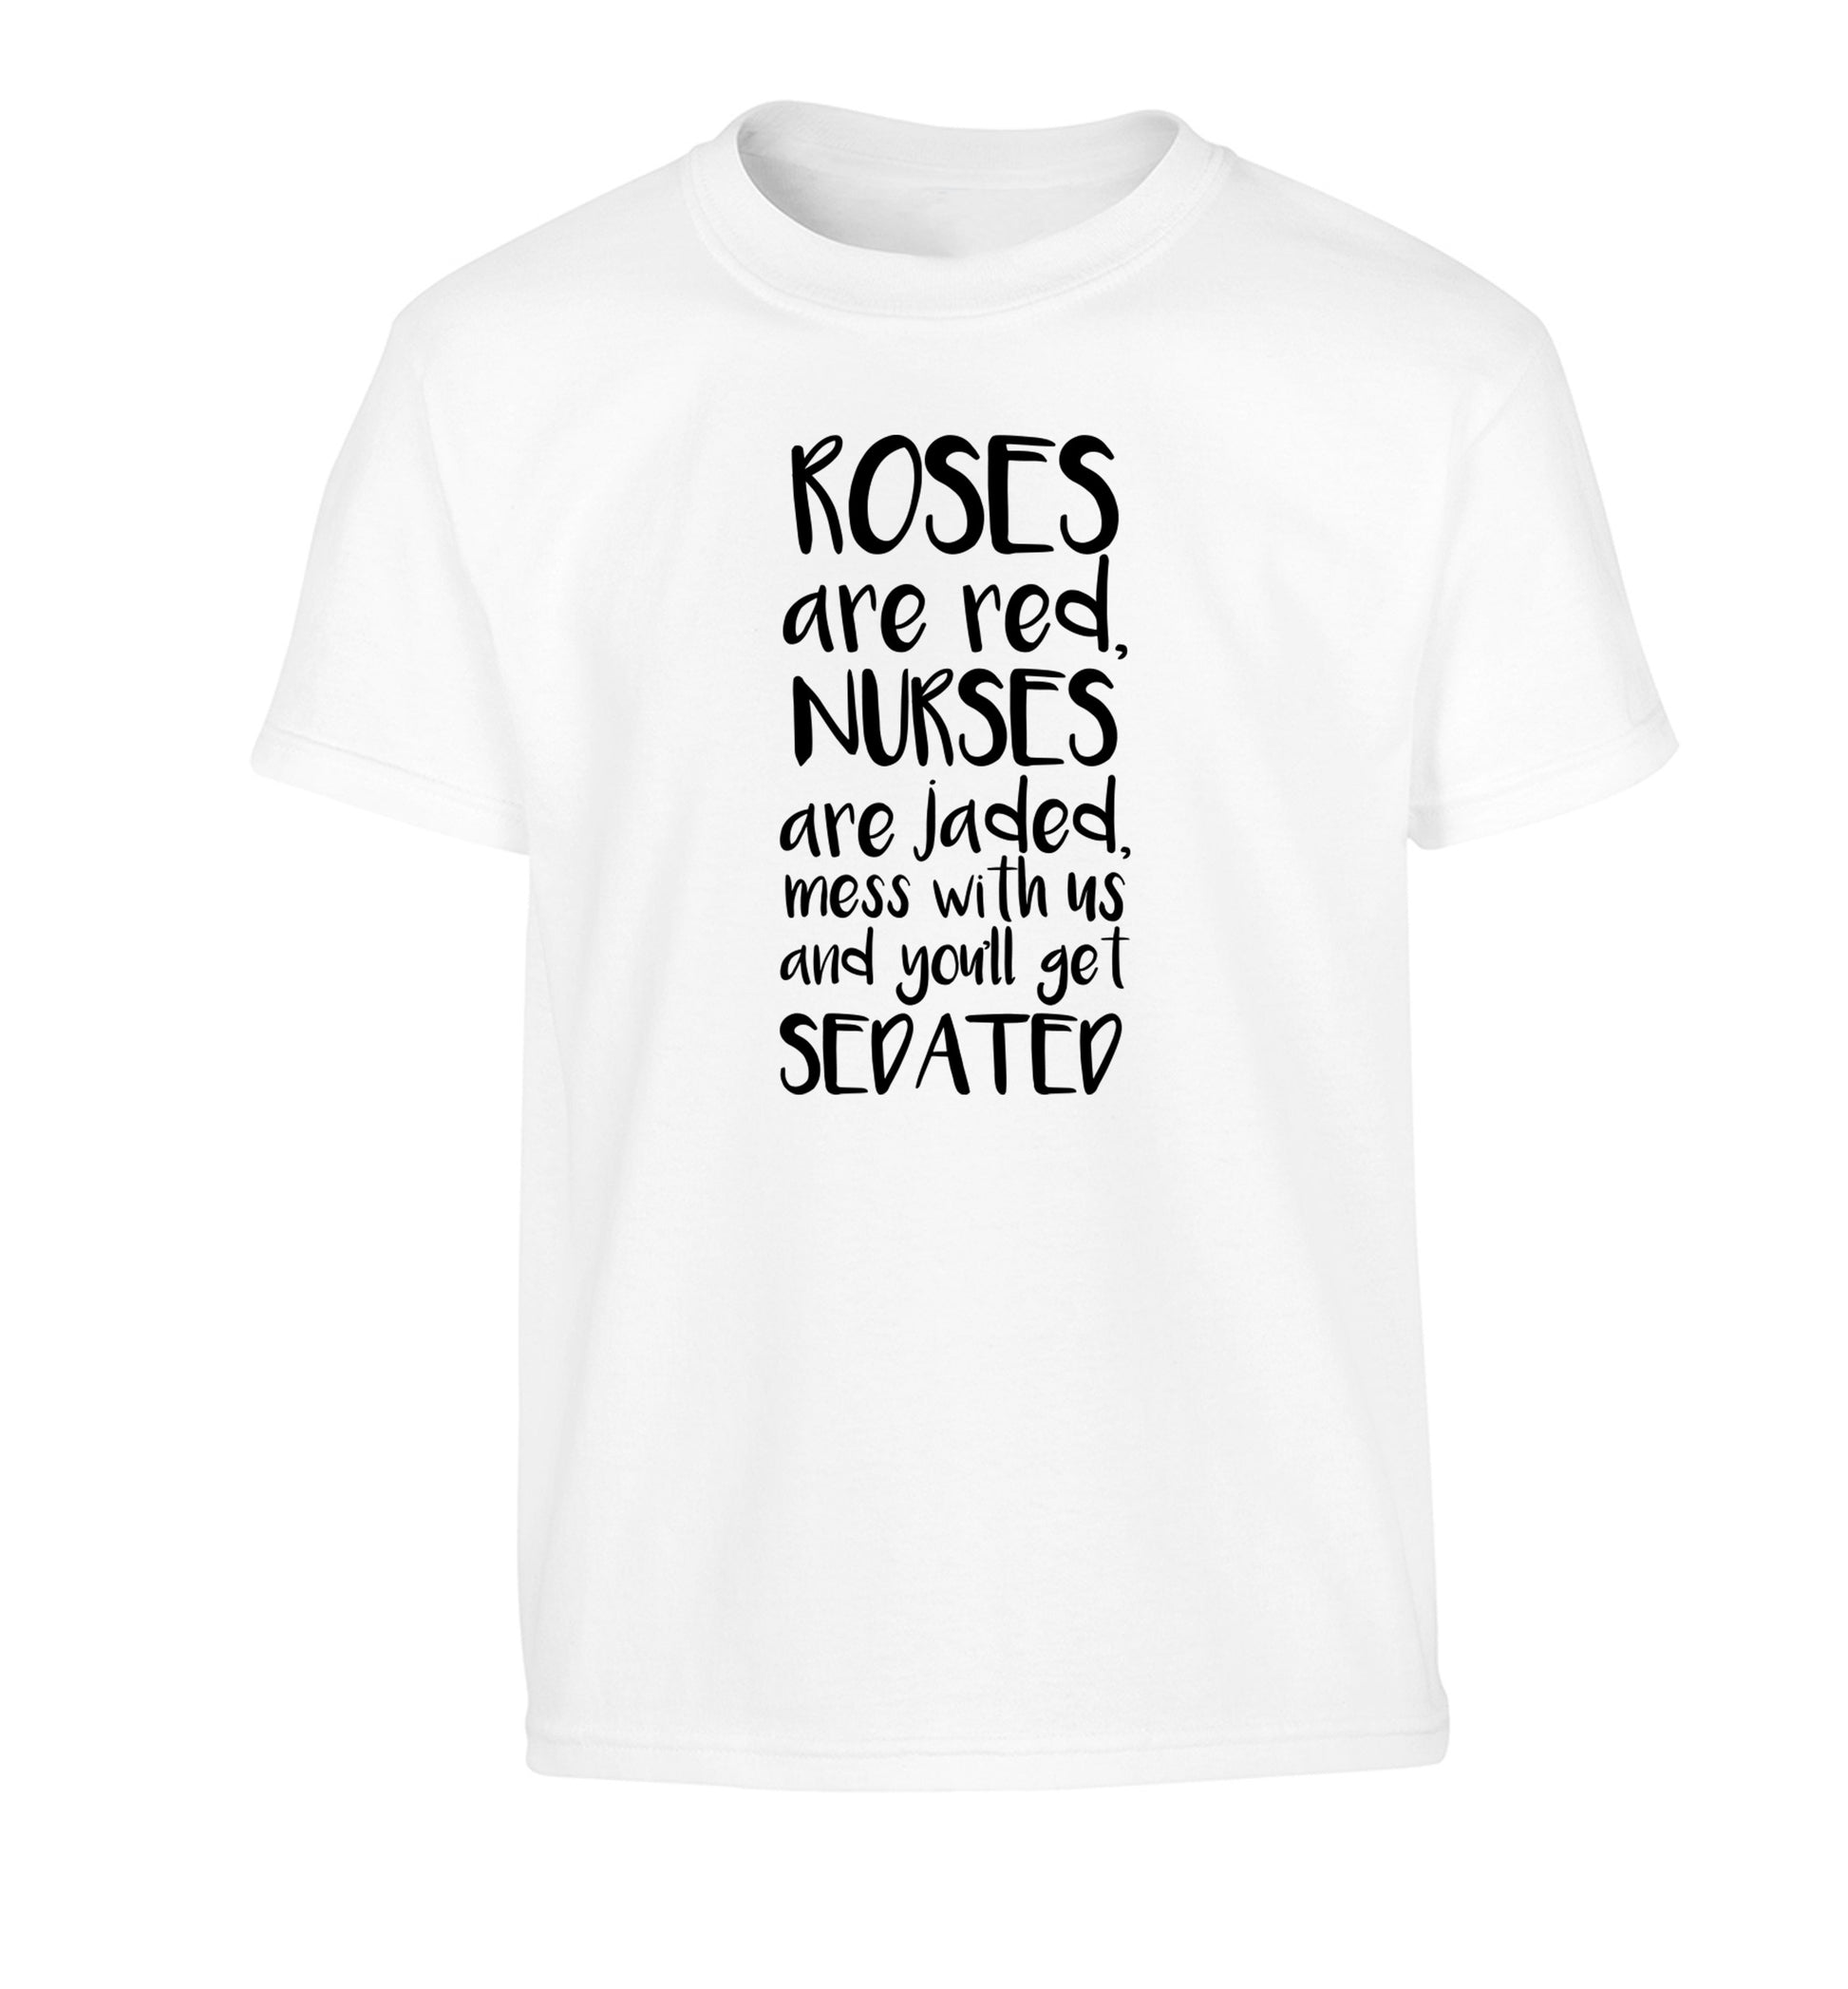 Roses are red, nurses are jaded, mess with us and you'll get sedated Children's white Tshirt 12-14 Years